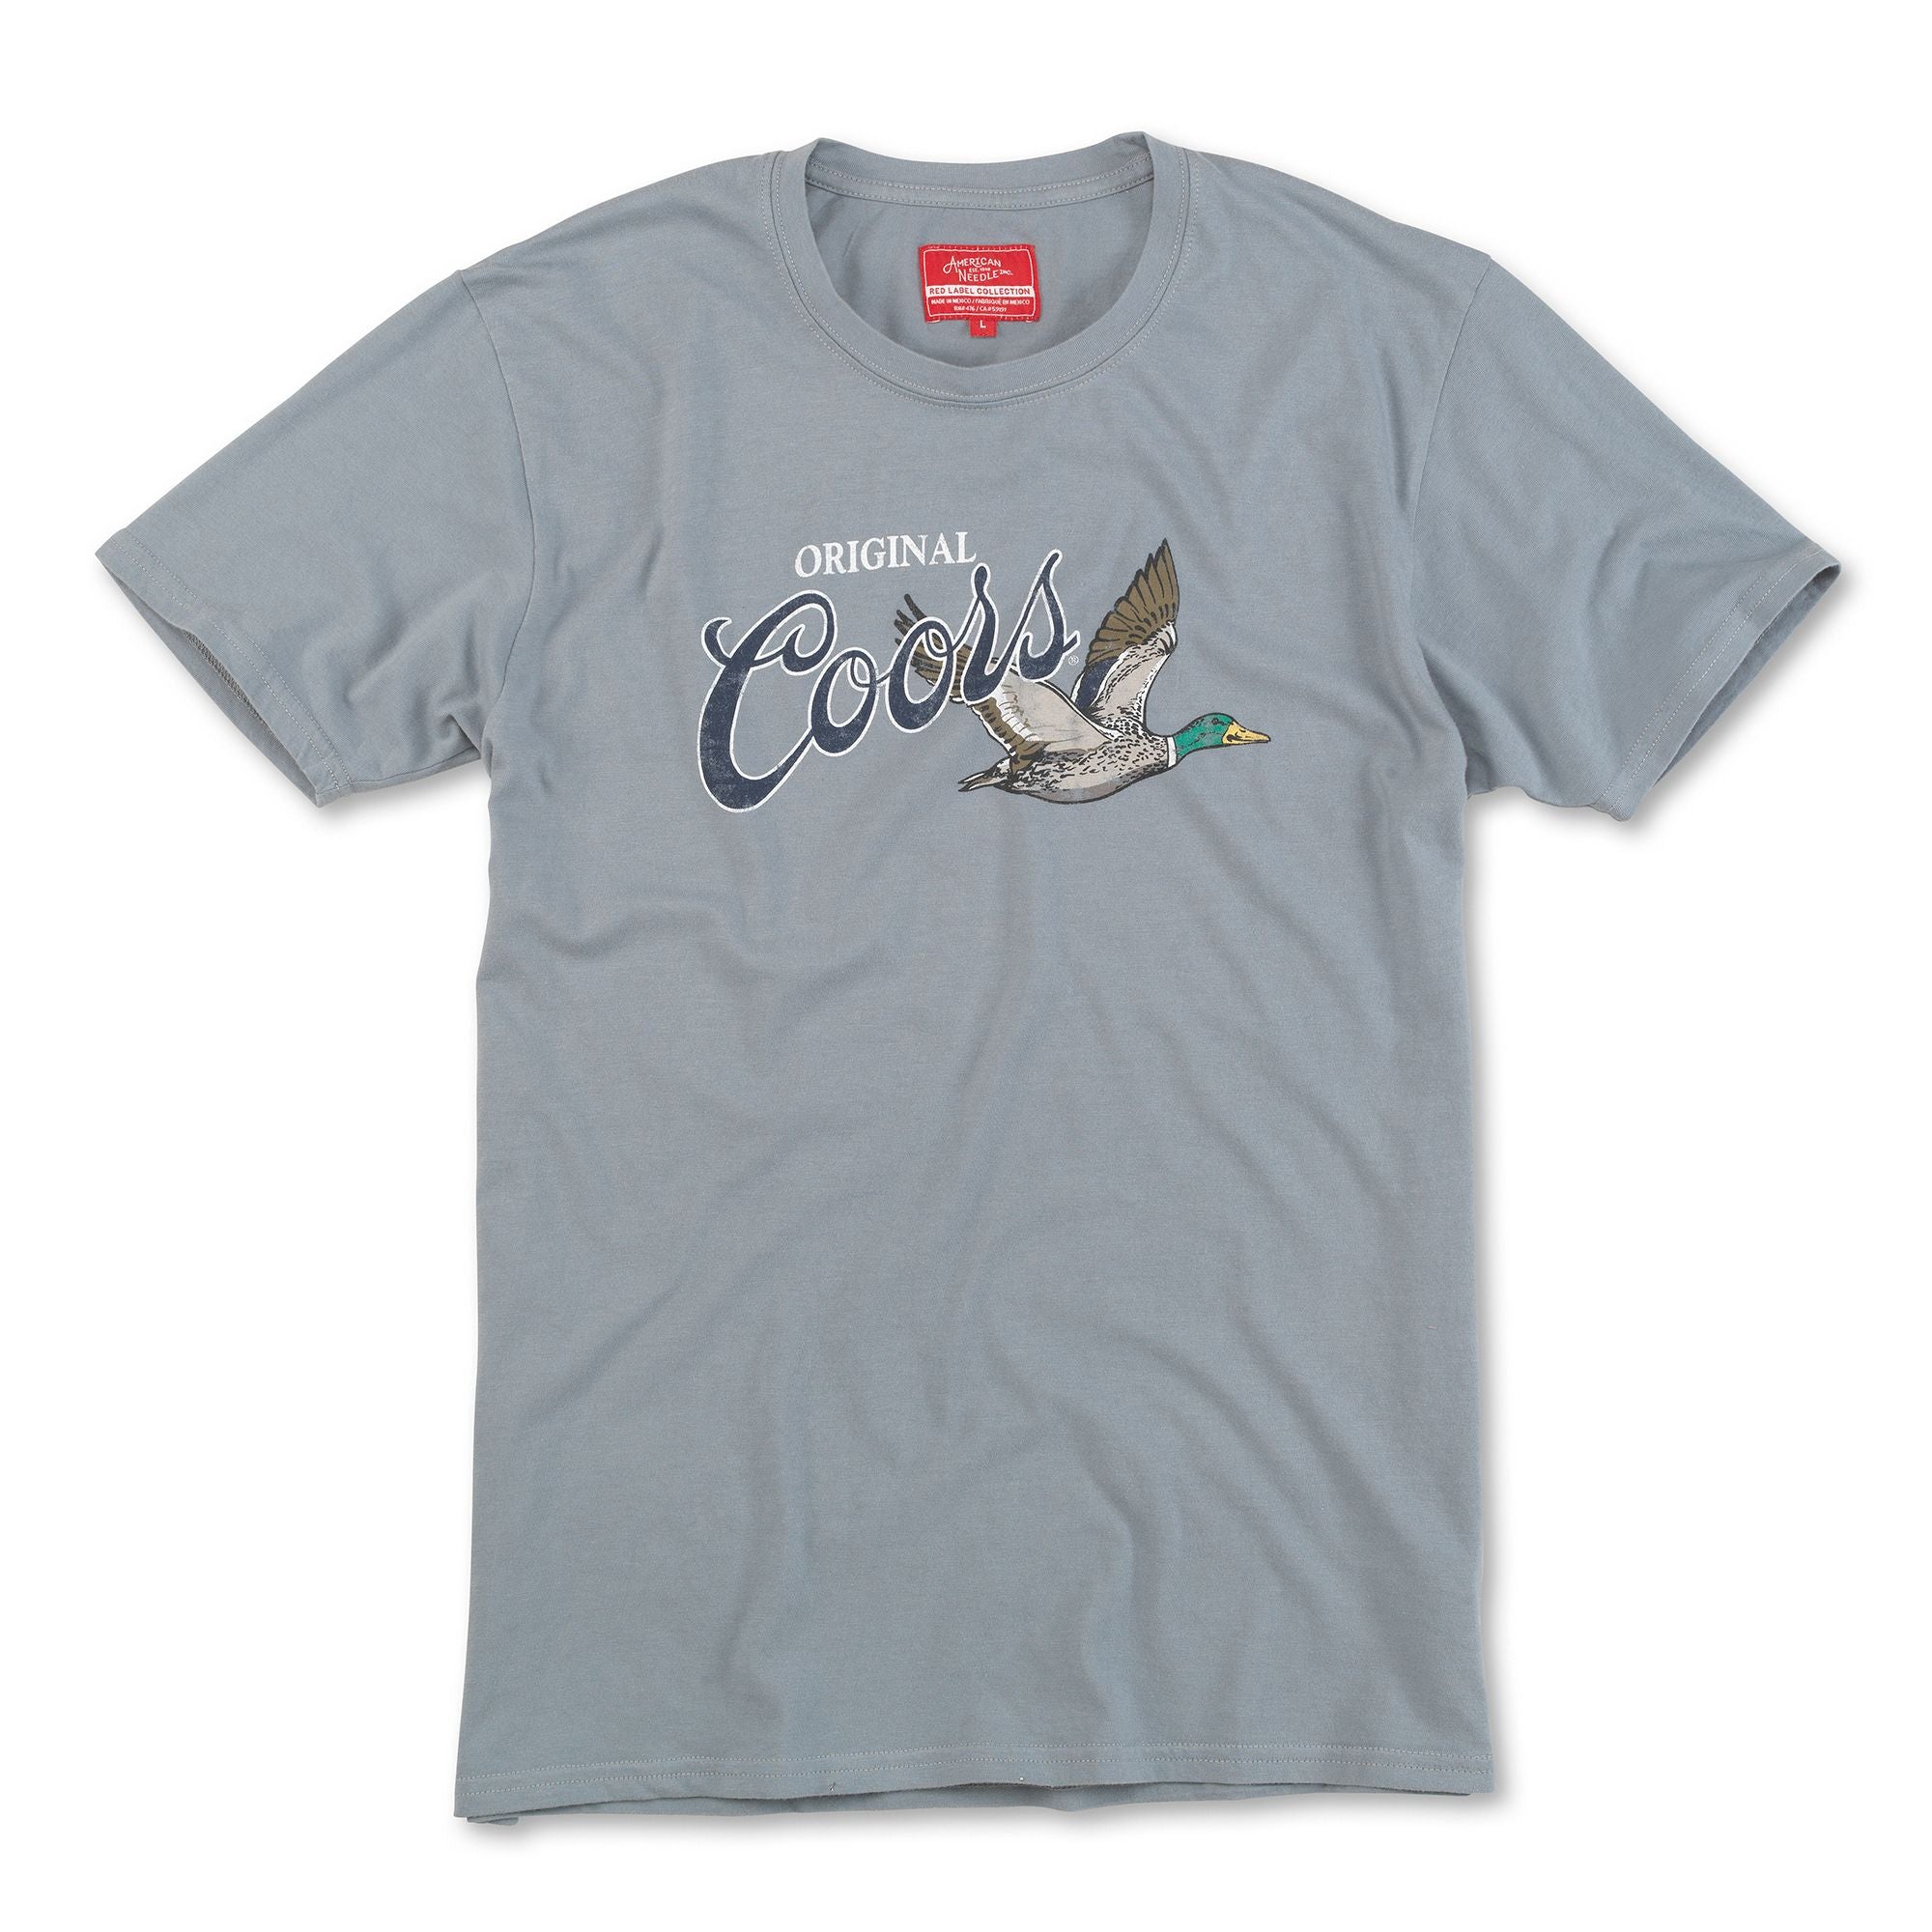 Coors Red Label Tee